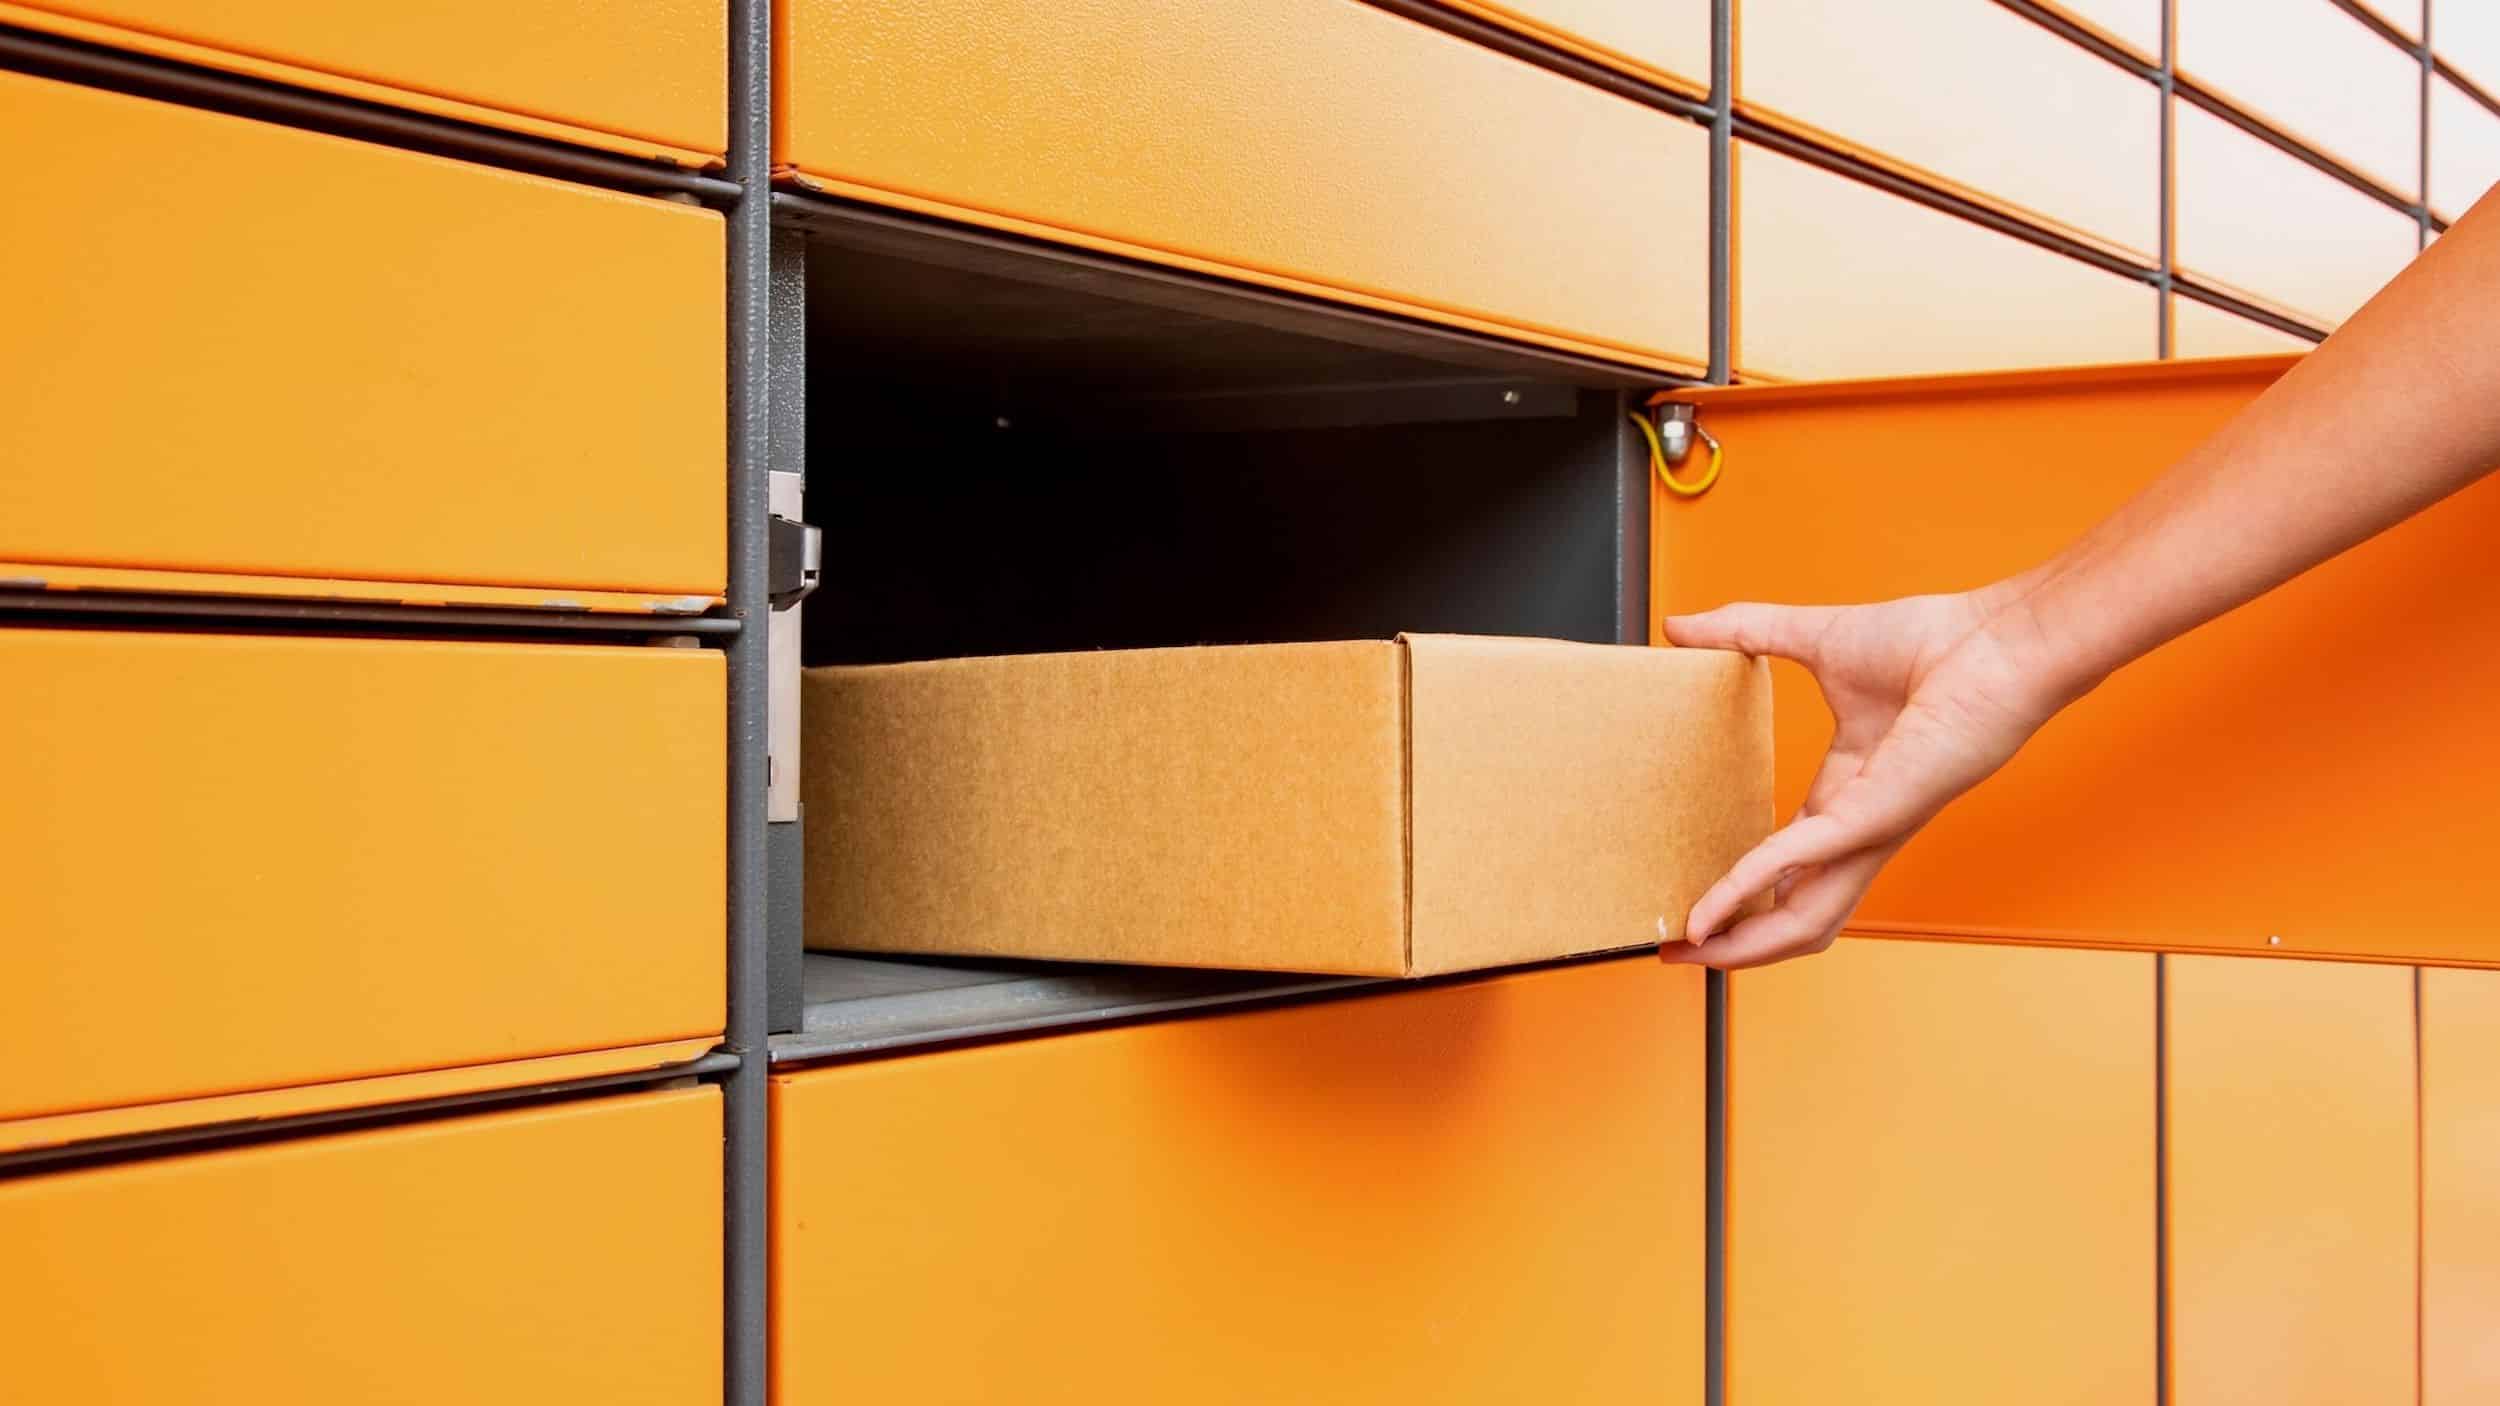 Orange amazon package lockers with one open and hand grabbing box.